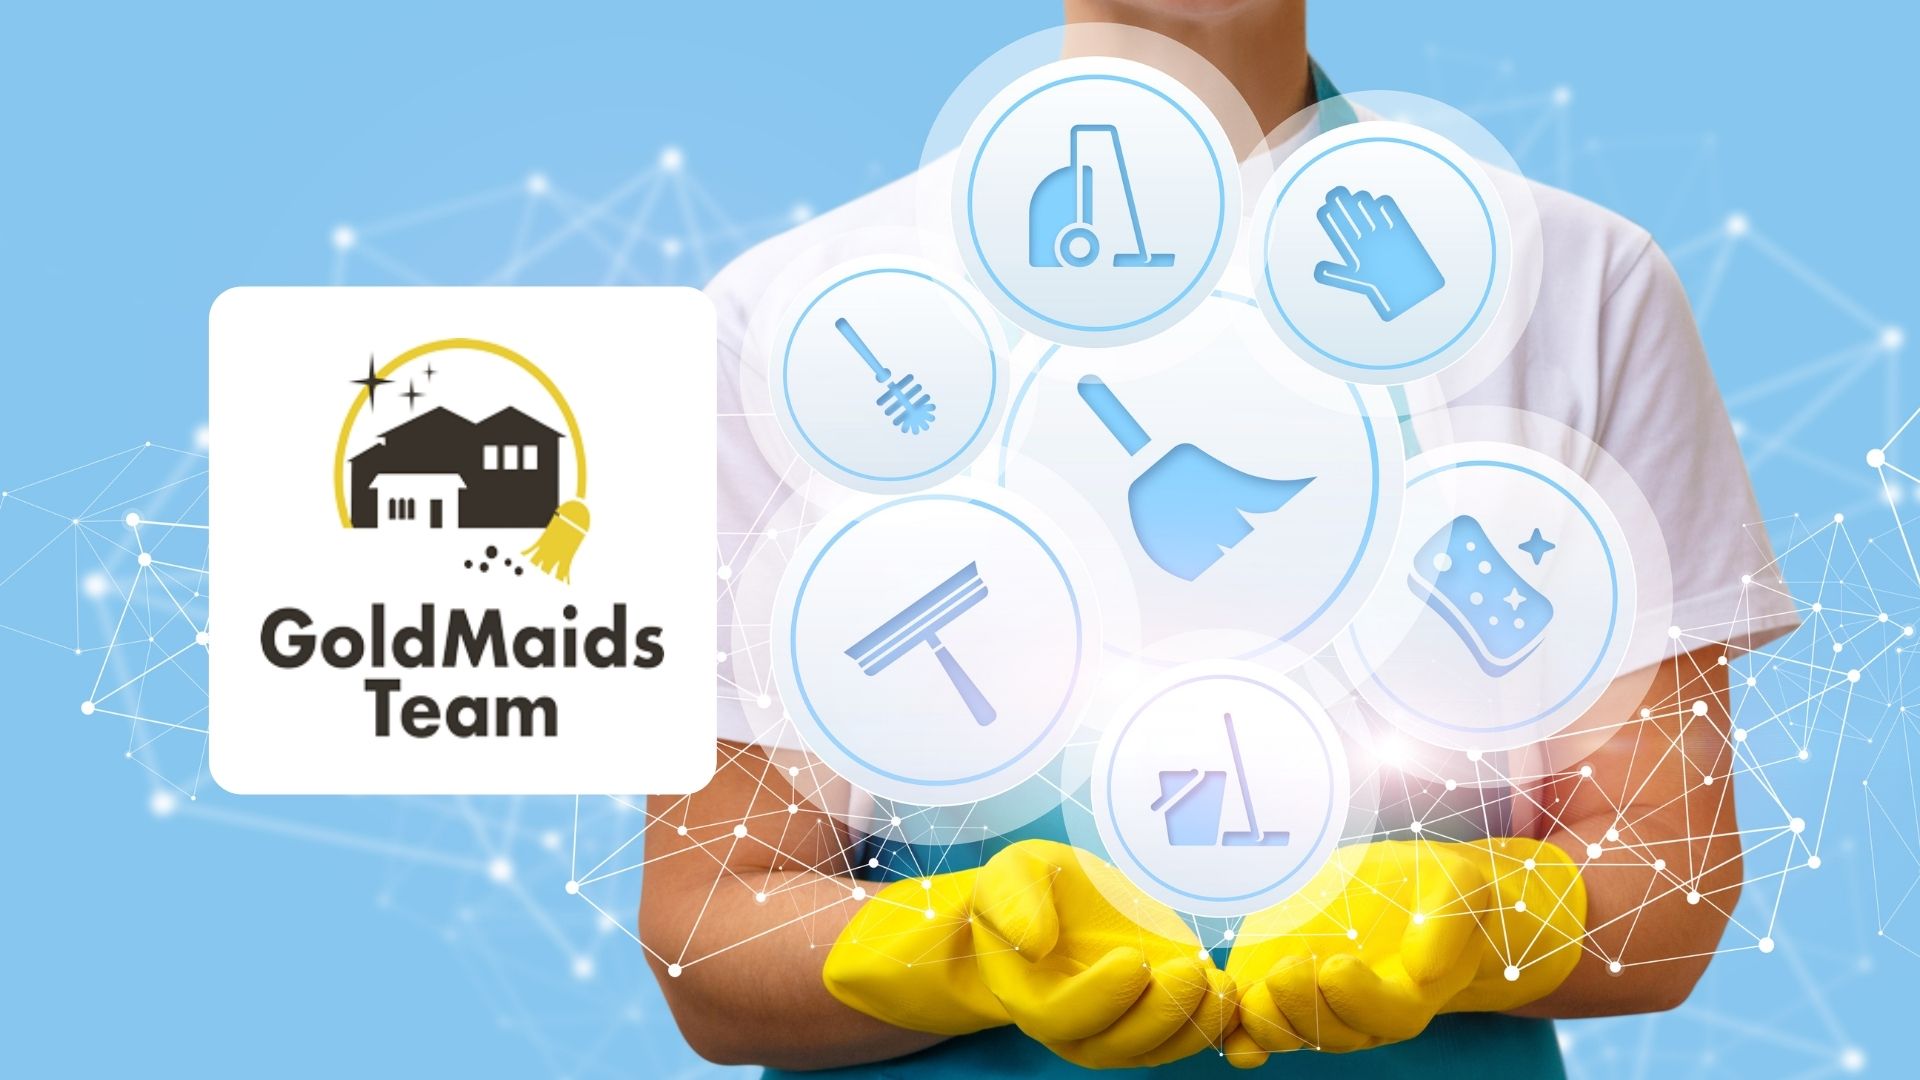 How to Fit a Cleaning Routine into a Busy Life - #1 Maid Service